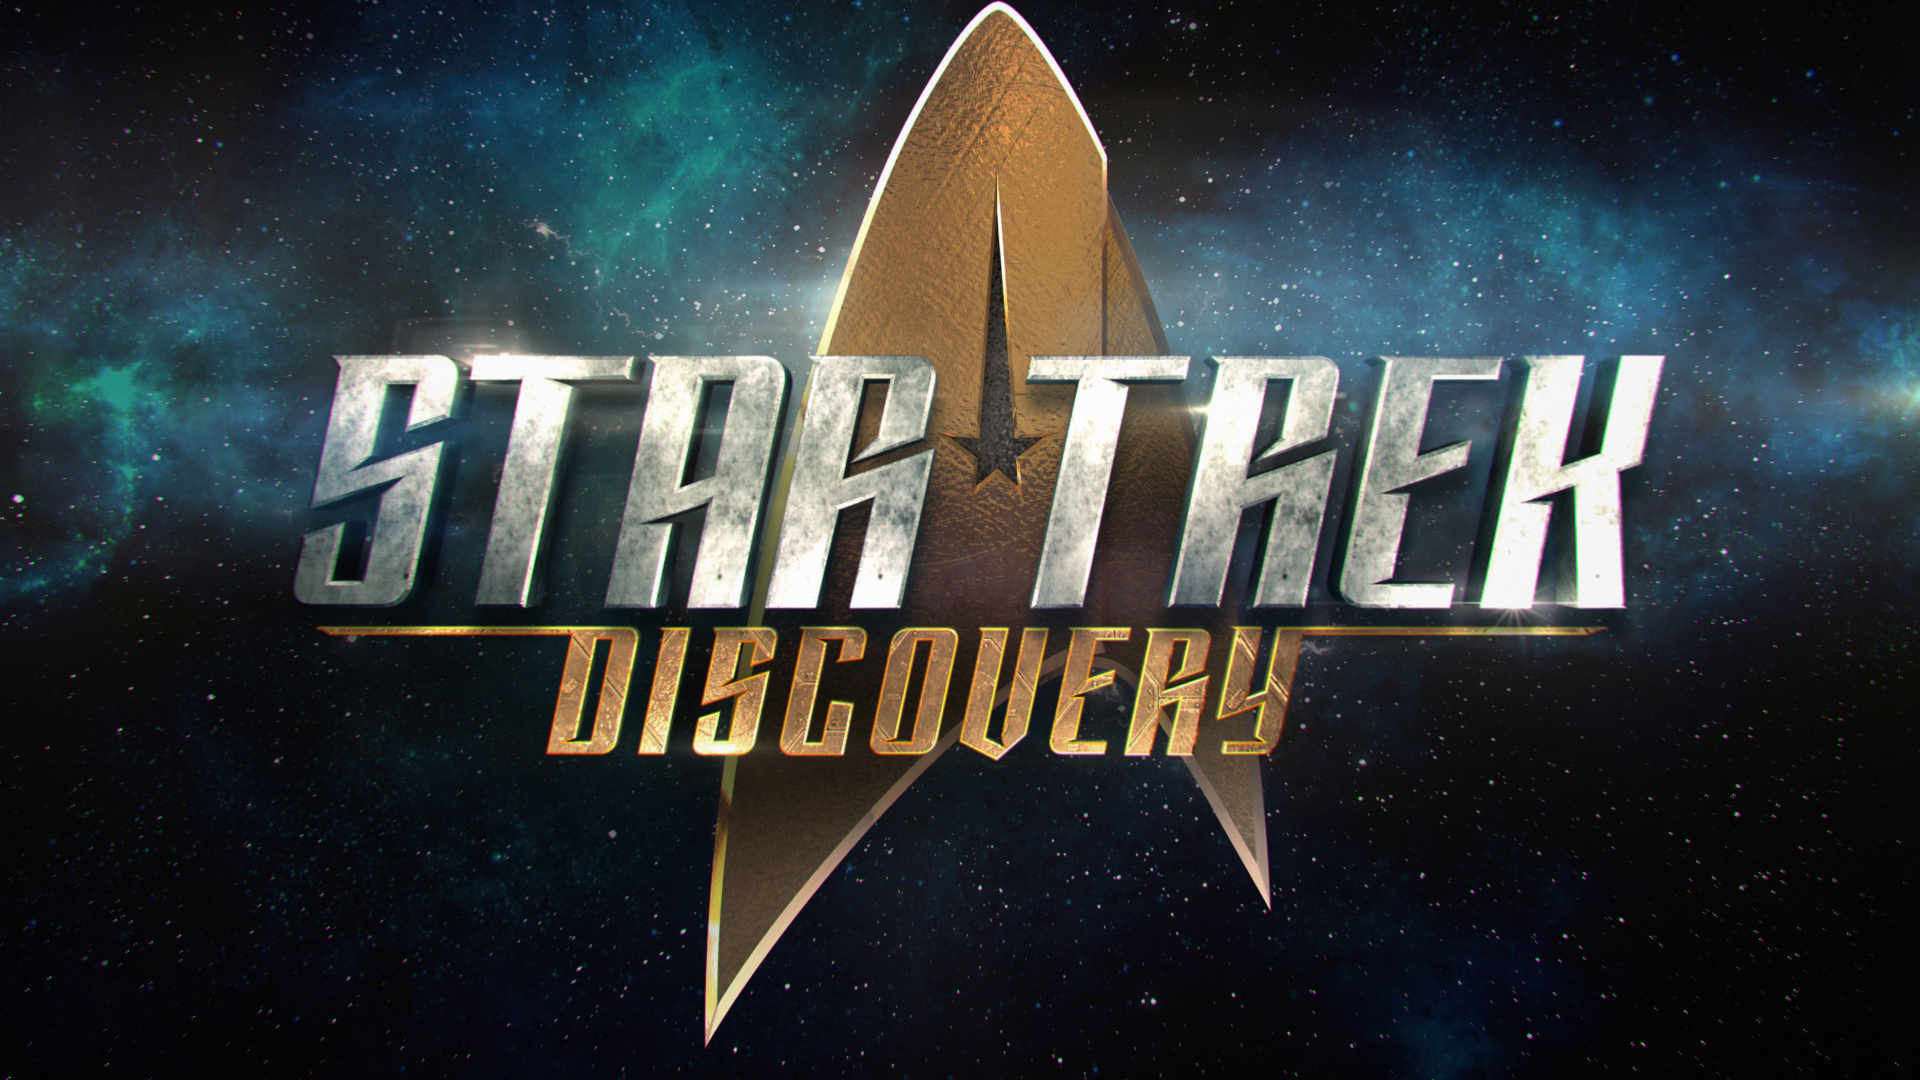 discovery wallpaper,font,text,fictional character,movie,logo